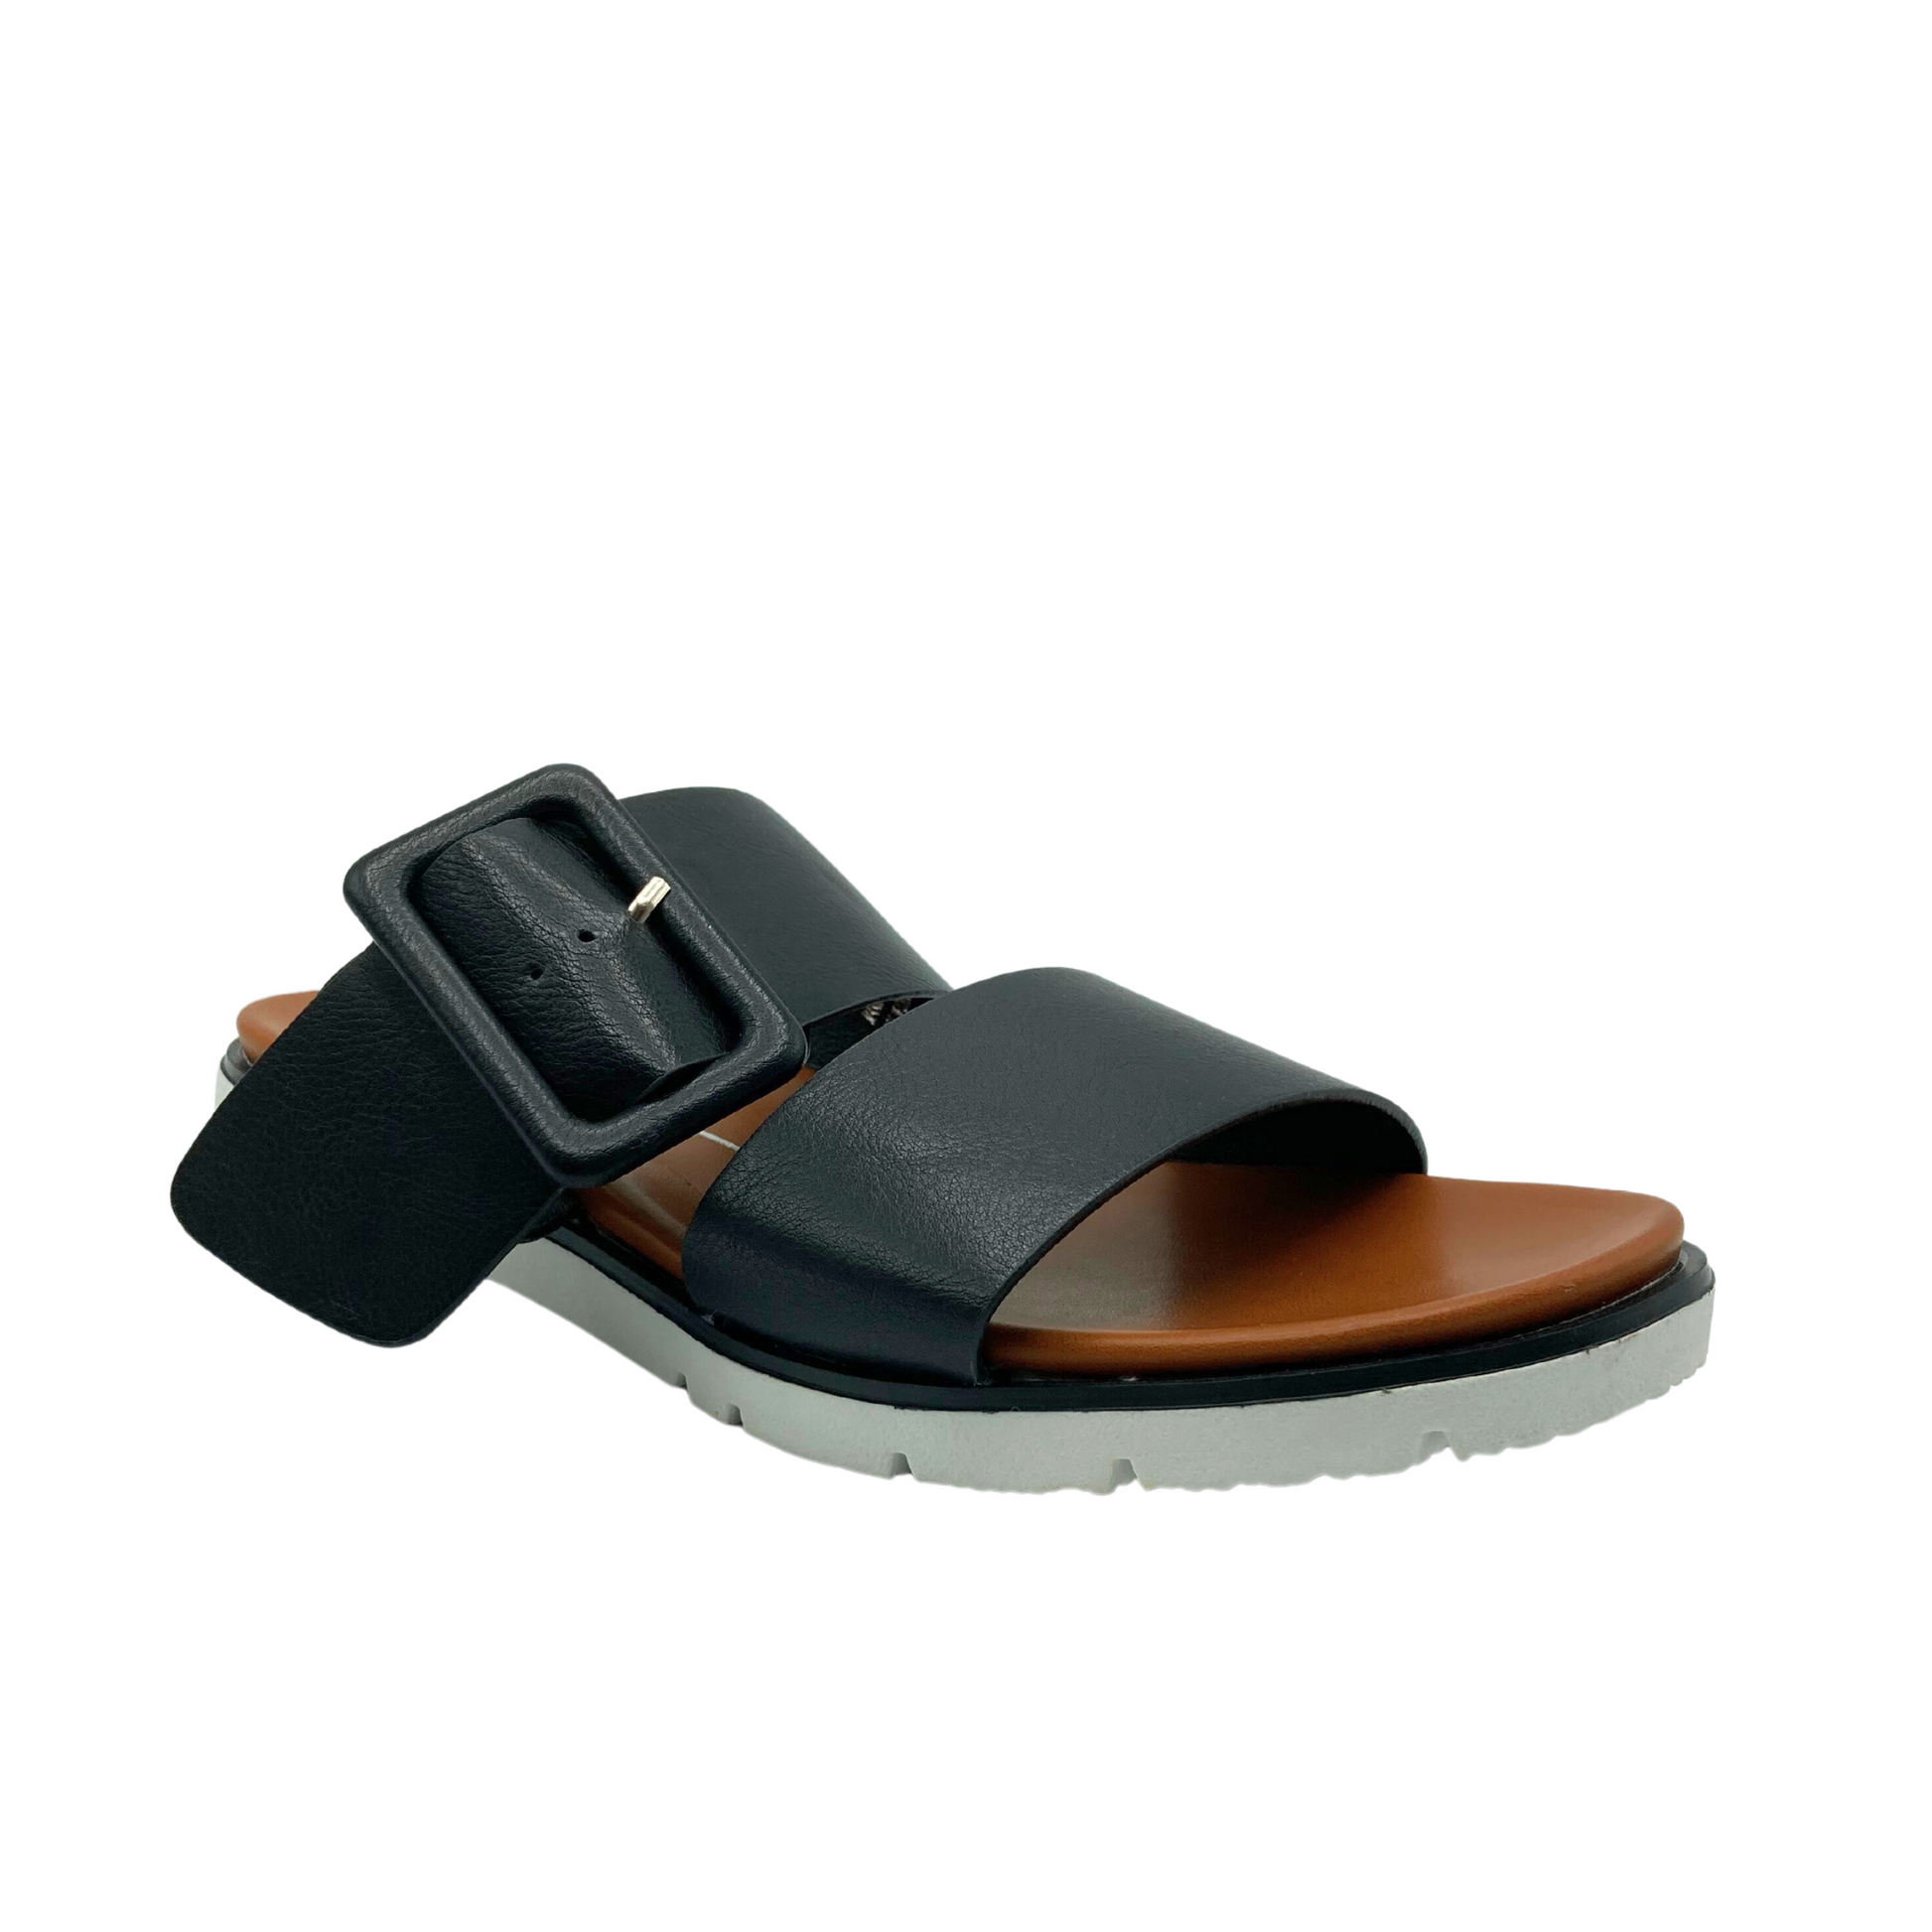 Angled front view of a black sandal with two wide straps and an adjustable buckle